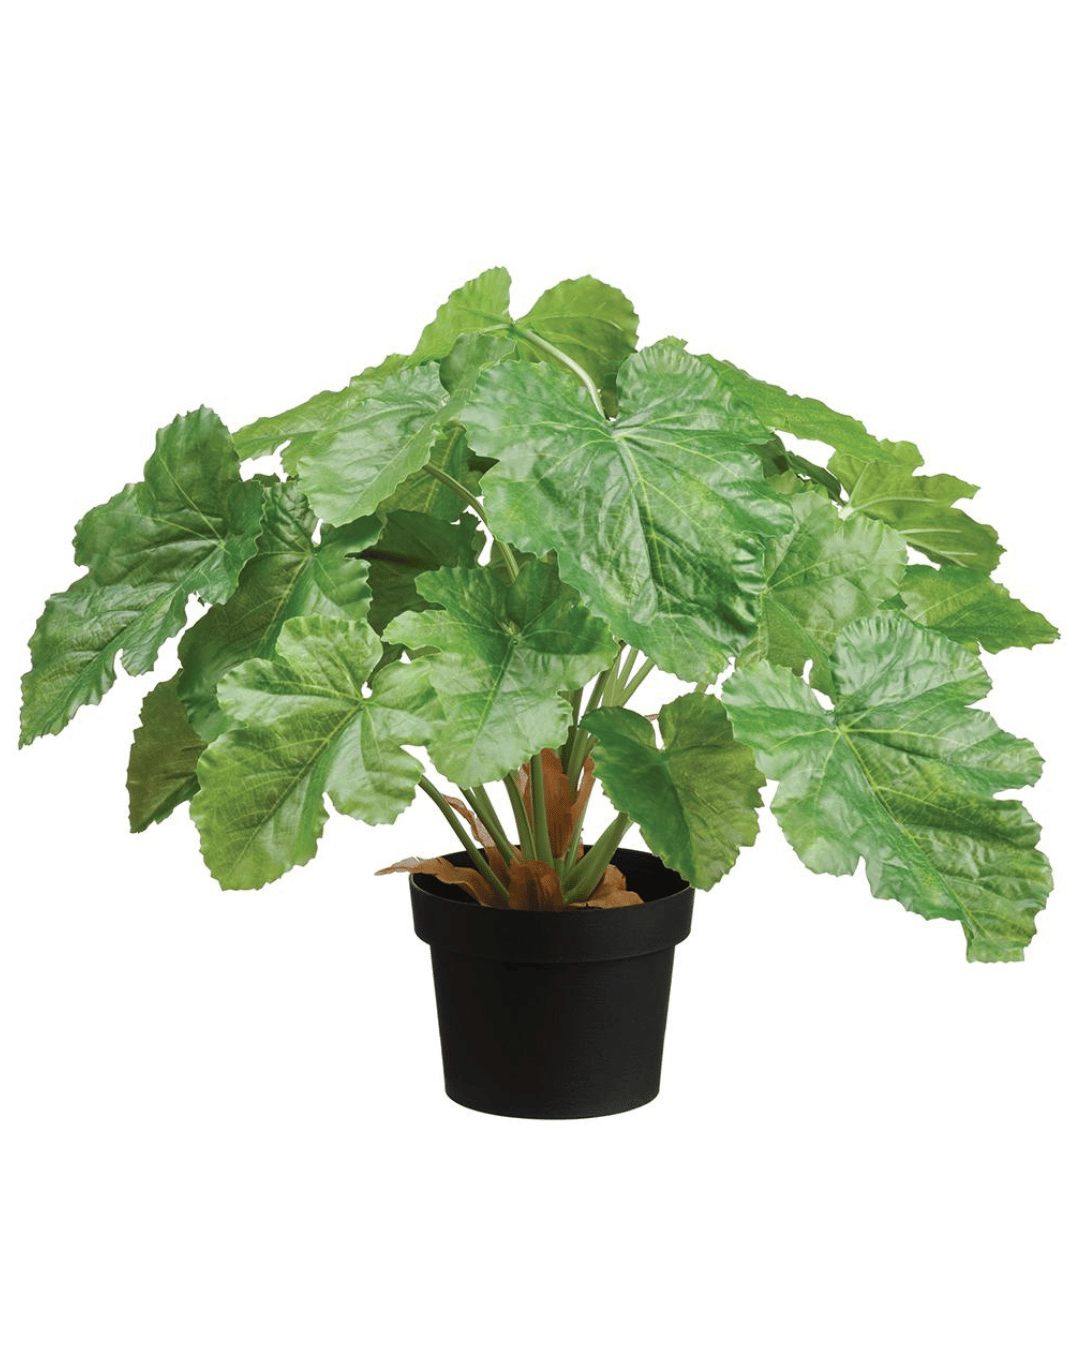 A lush green houseplant with large, lobed leaves in a black pot, isolated on a white background in a Scottsdale, Arizona bungalow - AllState Floral And Craft 18.75" Pelargonium Plant in Plastic Pot.